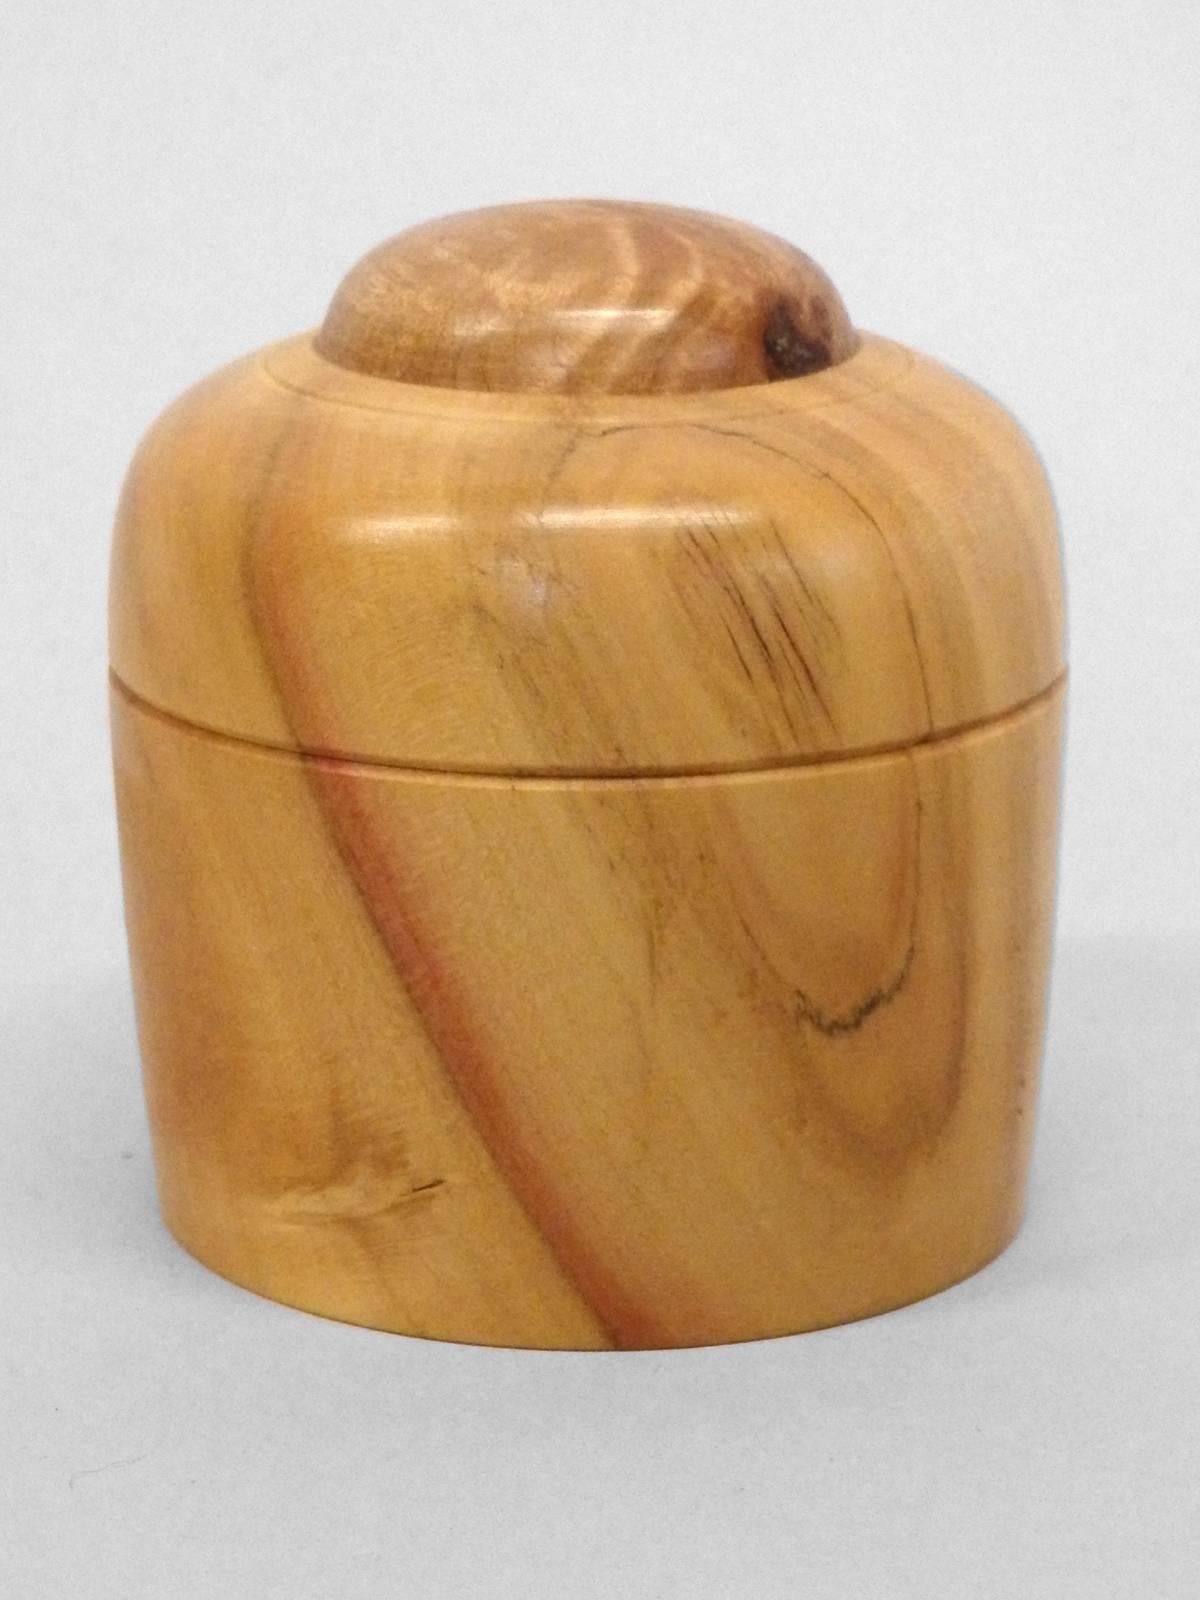 Four Studio Turned Wood Gift Canisters by Steve Sharpe For Sale 2